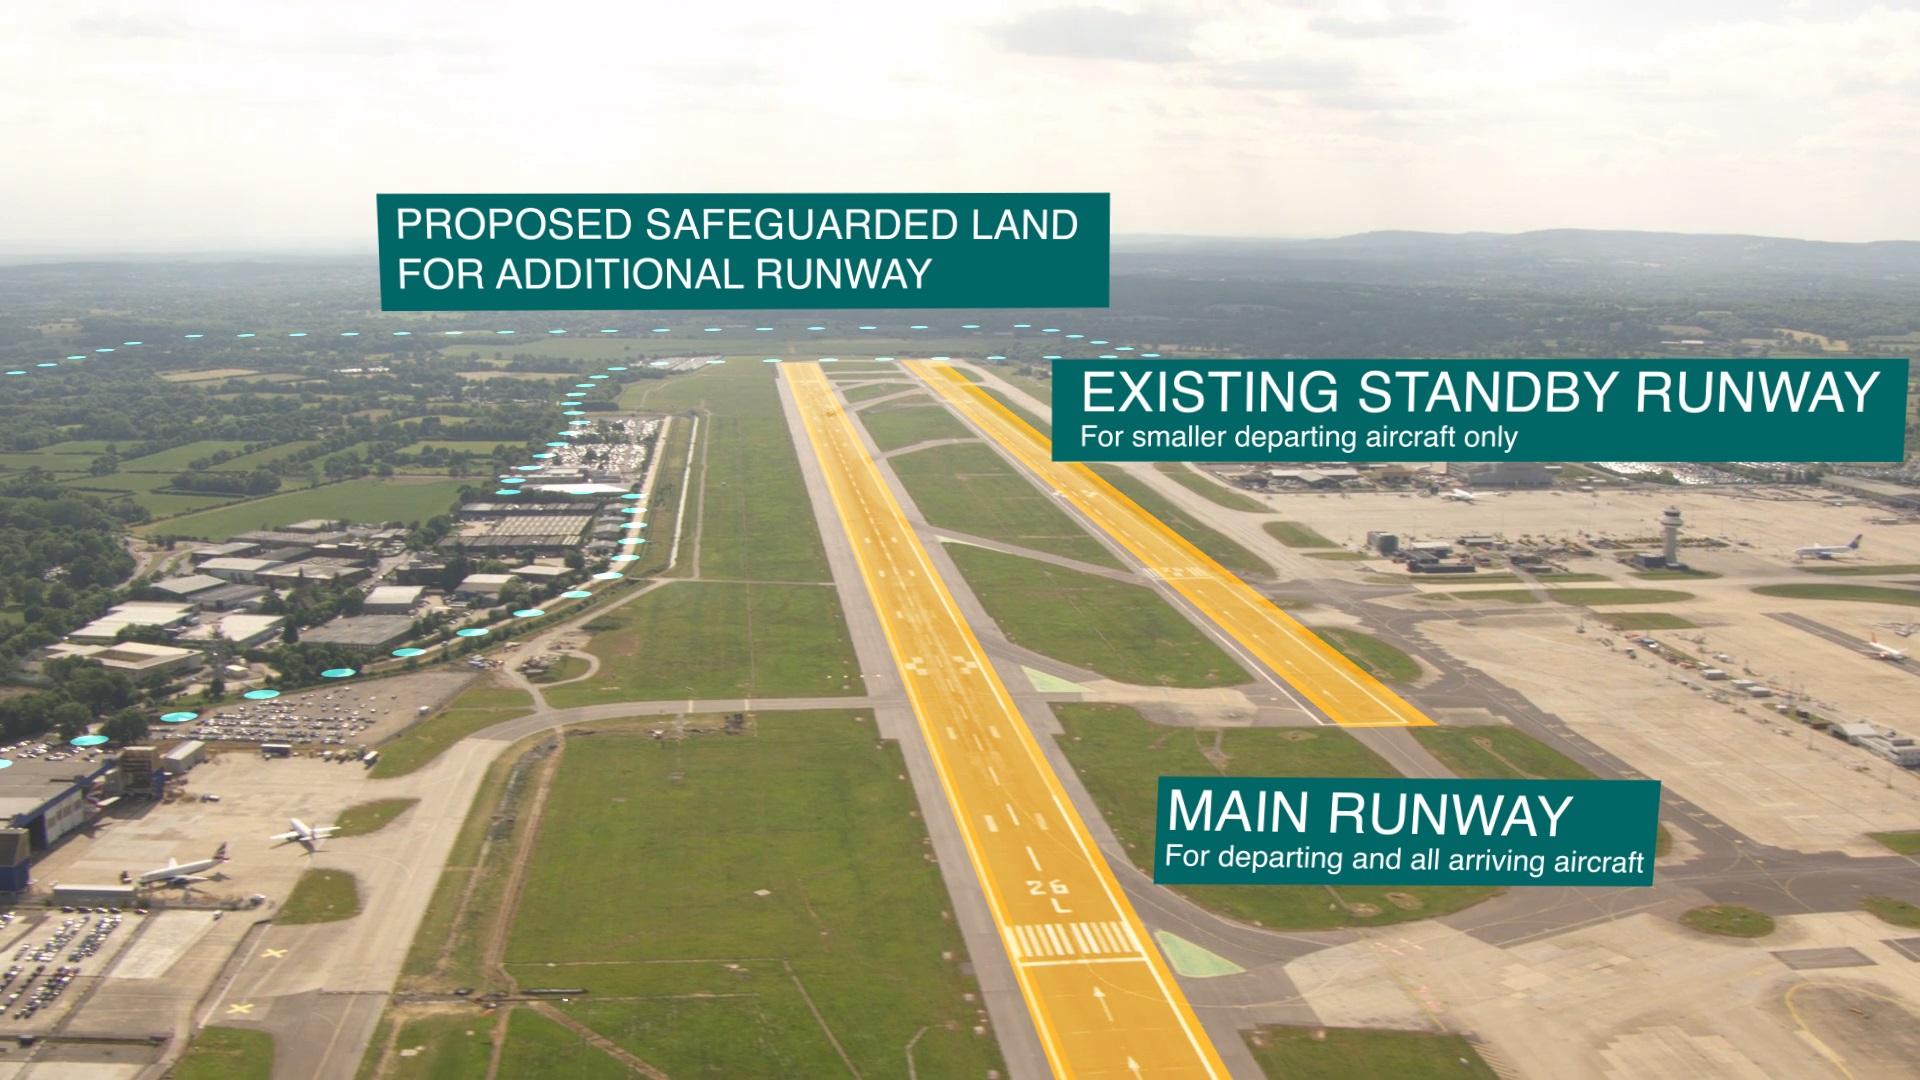 Sky ways: the standby runway (right) would be used only for departures